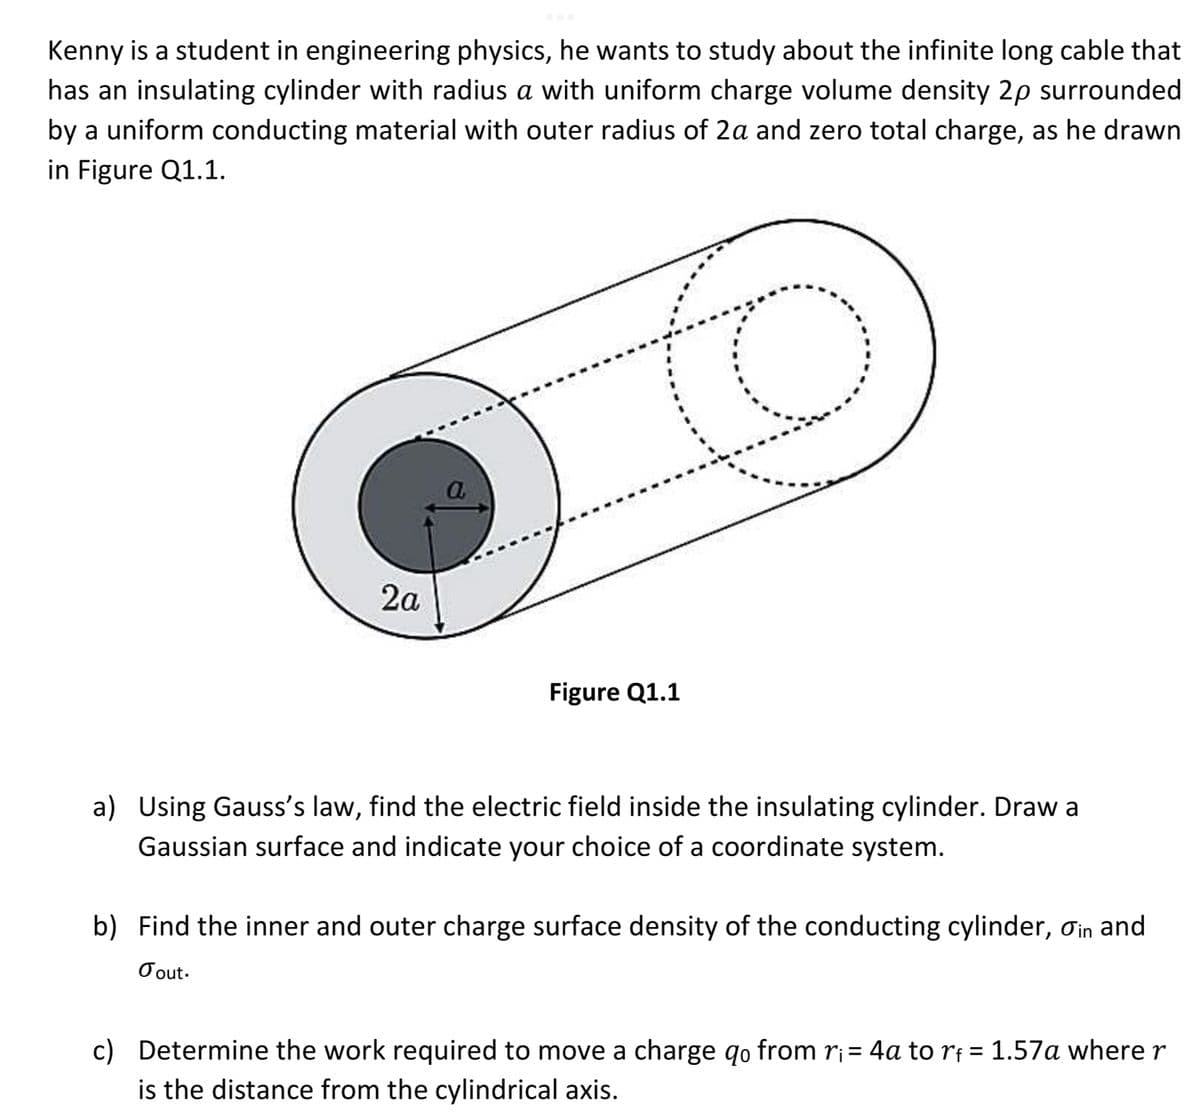 Kenny is a student in engineering physics, he wants to study about the infinite long cable that
has an insulating cylinder with radius a with uniform charge volume density 2p surrounded
by a uniform conducting material with outer radius of 2a and zero total charge, as he drawn
in Figure Q1.1.
2a
Figure Q1.1
a) Using Gauss's law, find the electric field inside the insulating cylinder. Draw a
Gaussian surface and indicate your choice of a coordinate system.
b) Find the inner and outer charge surface density of the conducting cylinder, oin and
Tout.
c) Determine the work required to move a charge qo from r₁ = 4a to rf = 1.57a where r
is the distance from the cylindrical axis.